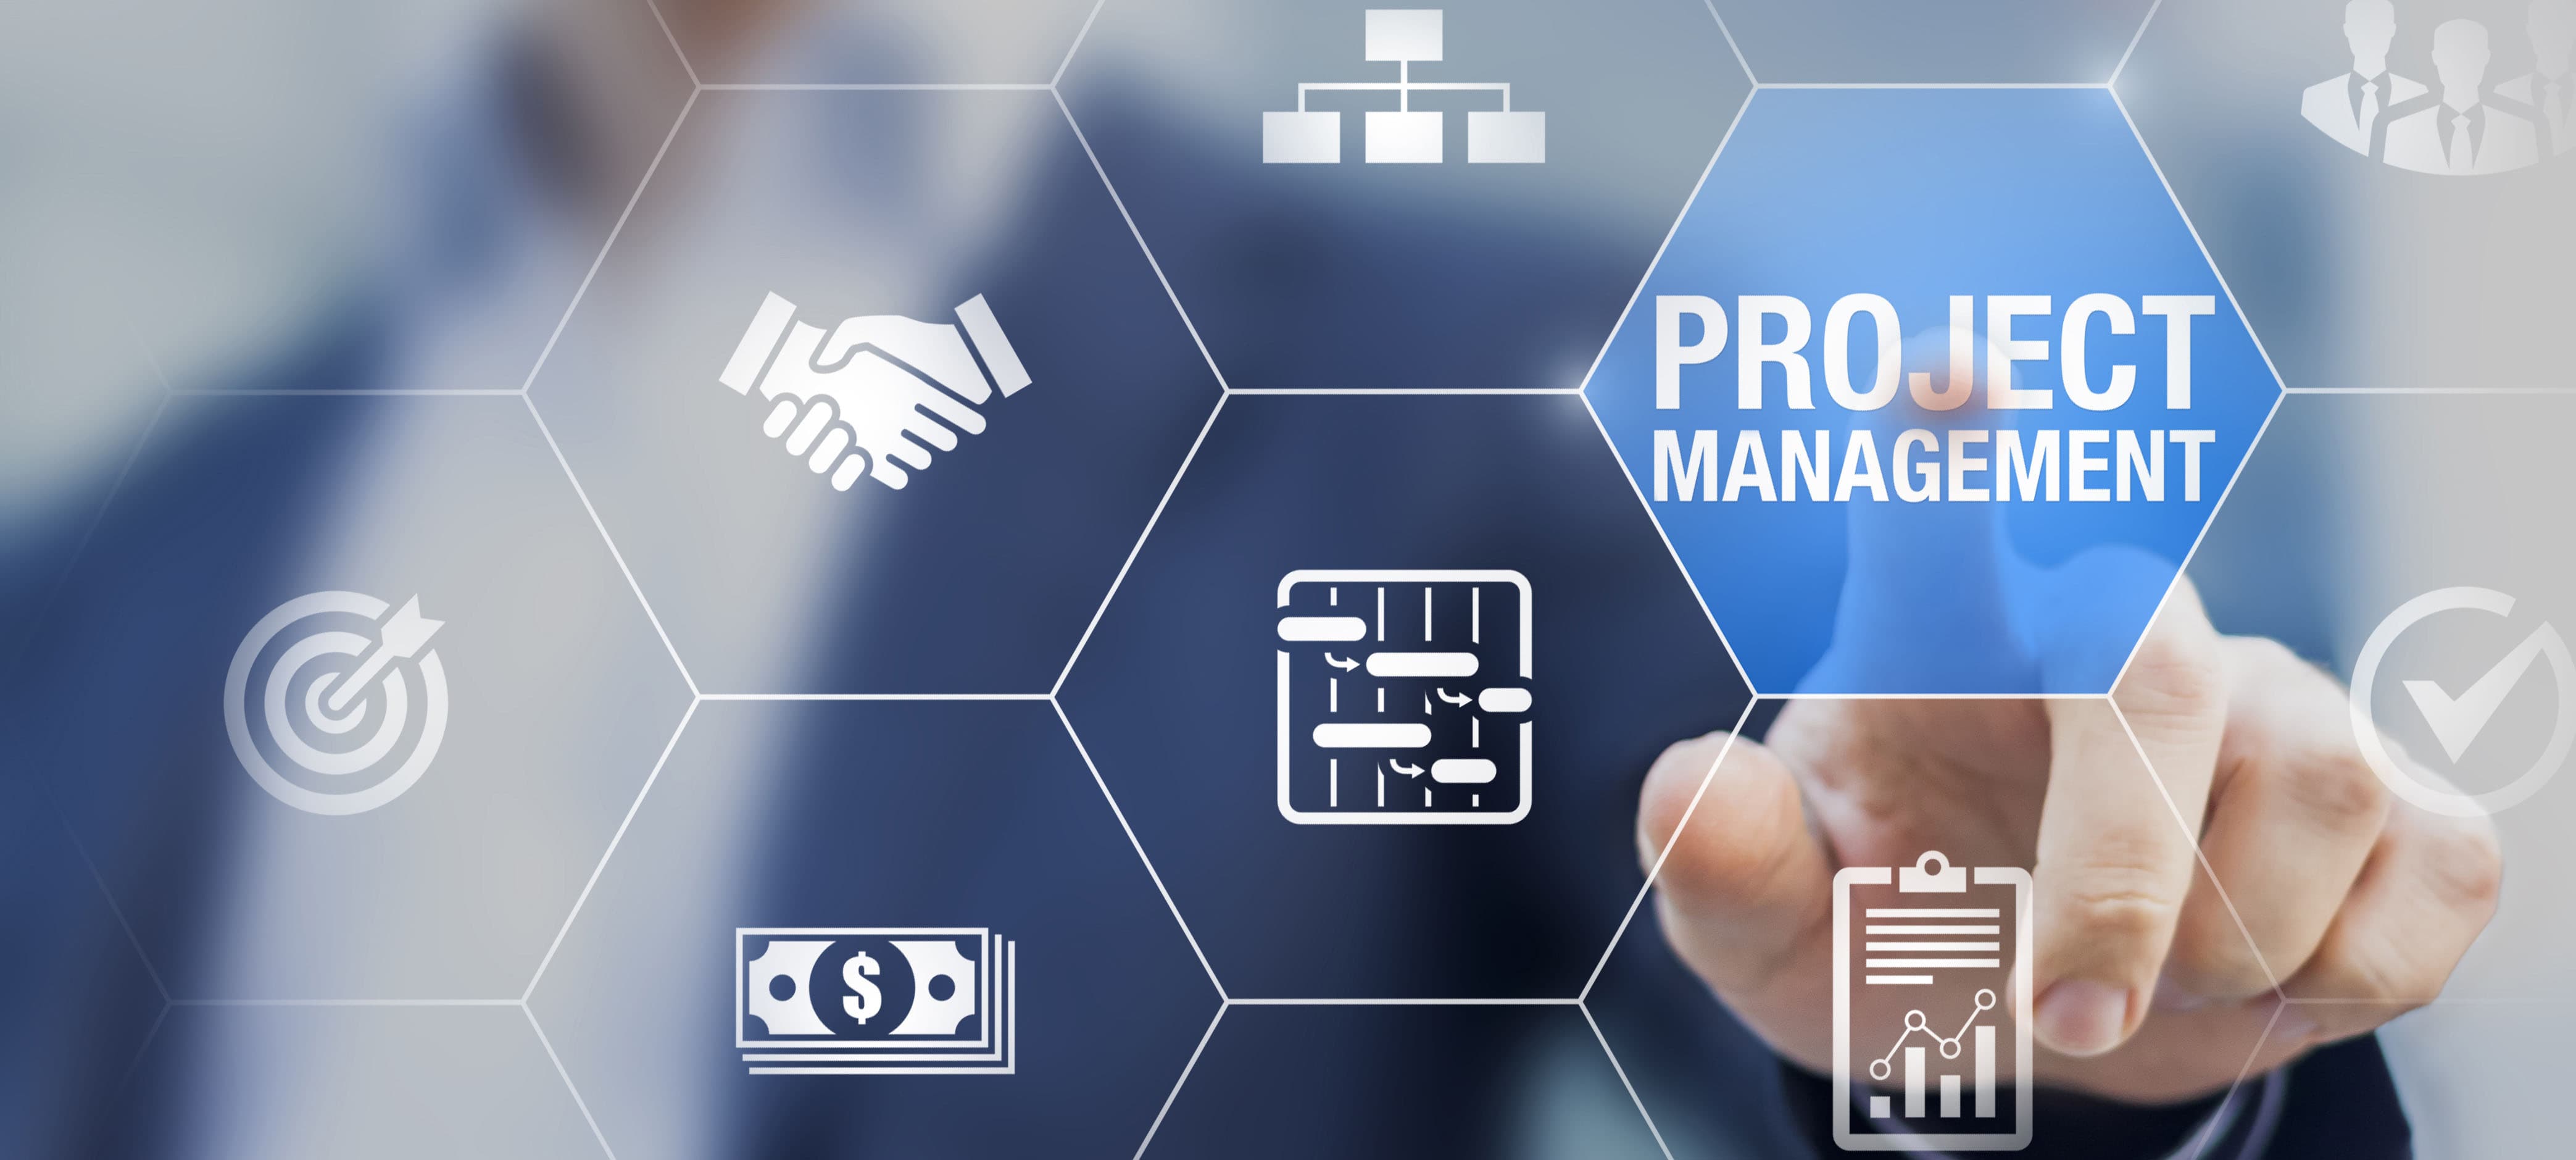 How to Choose the Best Project Management Software